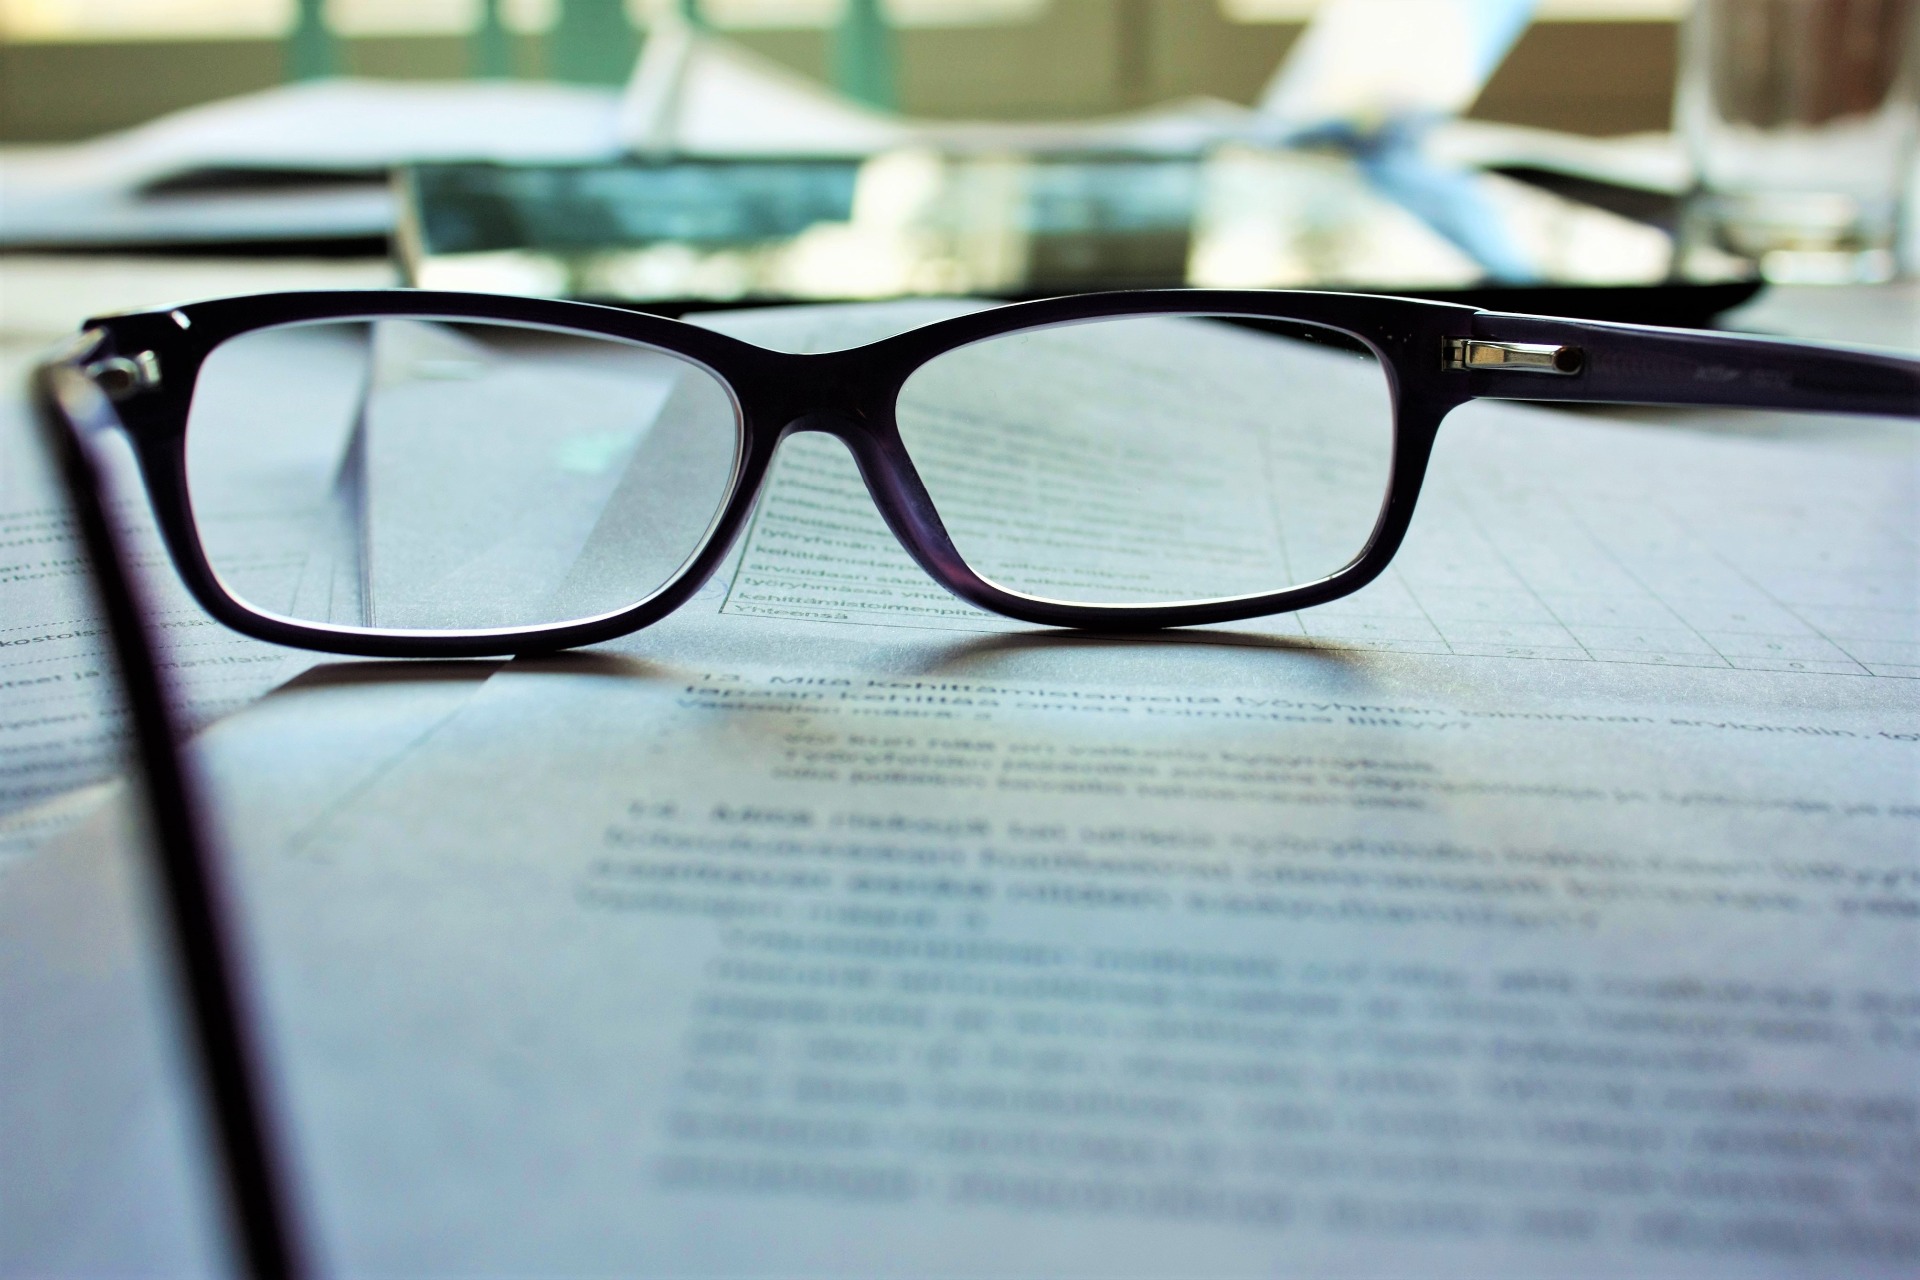 A pair of glasses resting on a legal document.